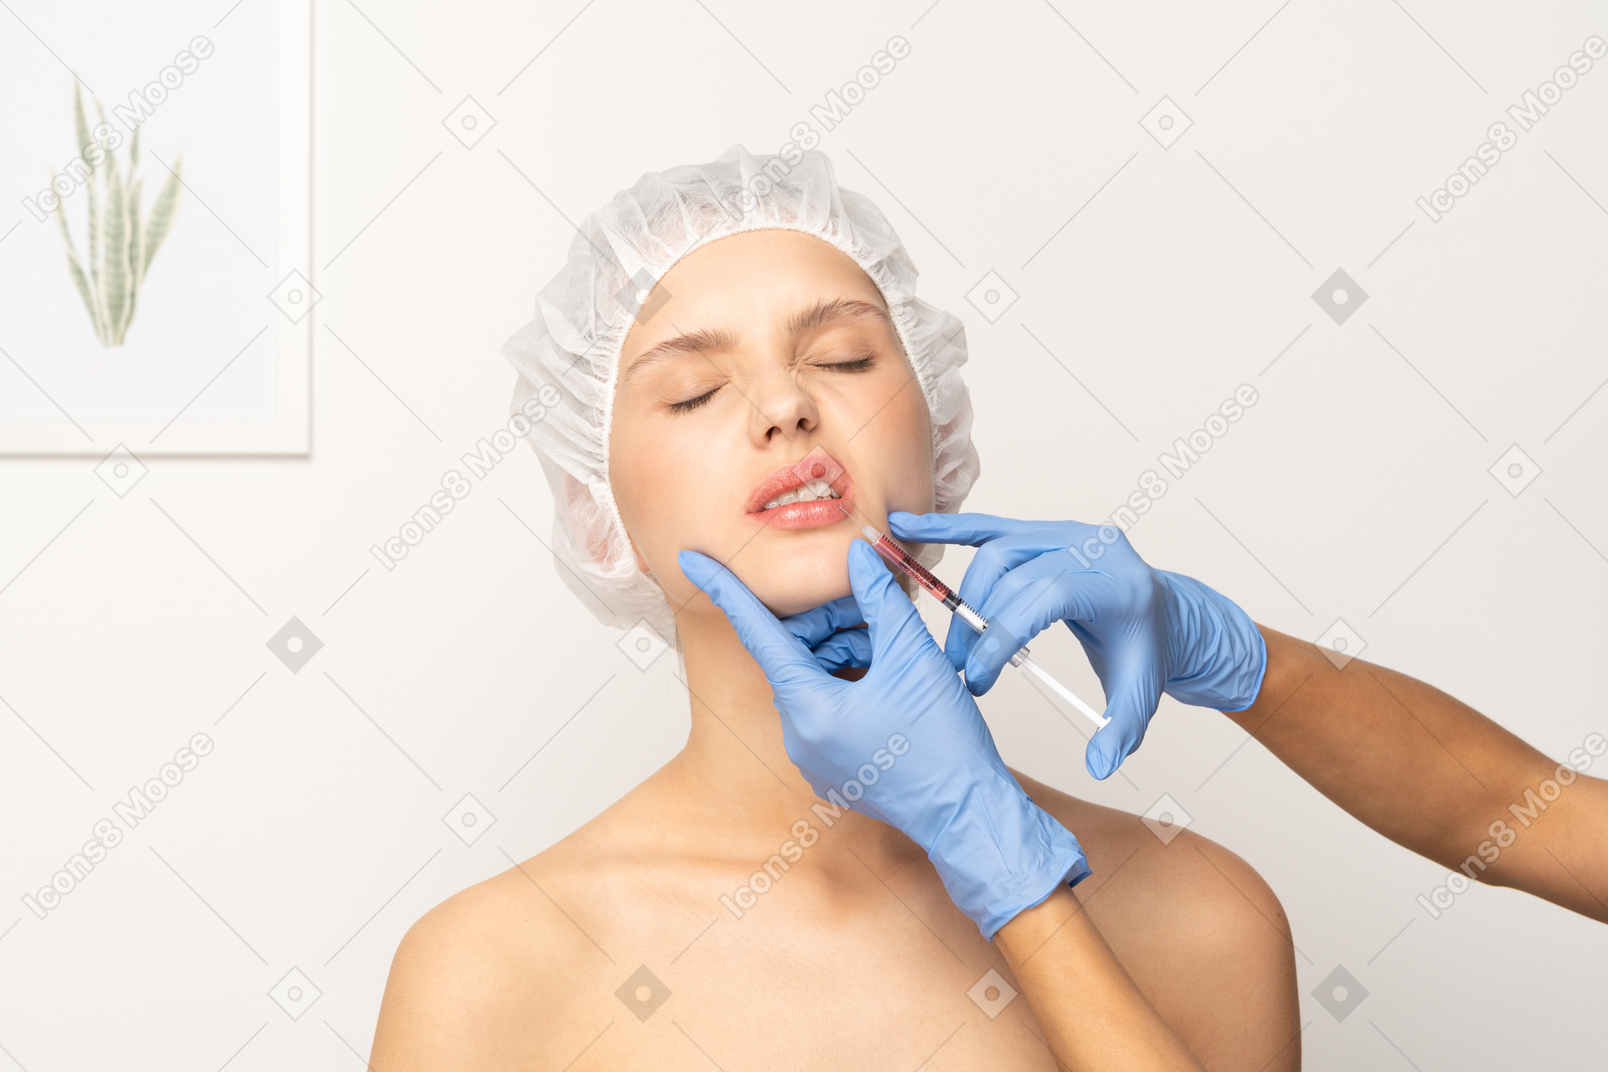 Woman feeling pain during botox injection